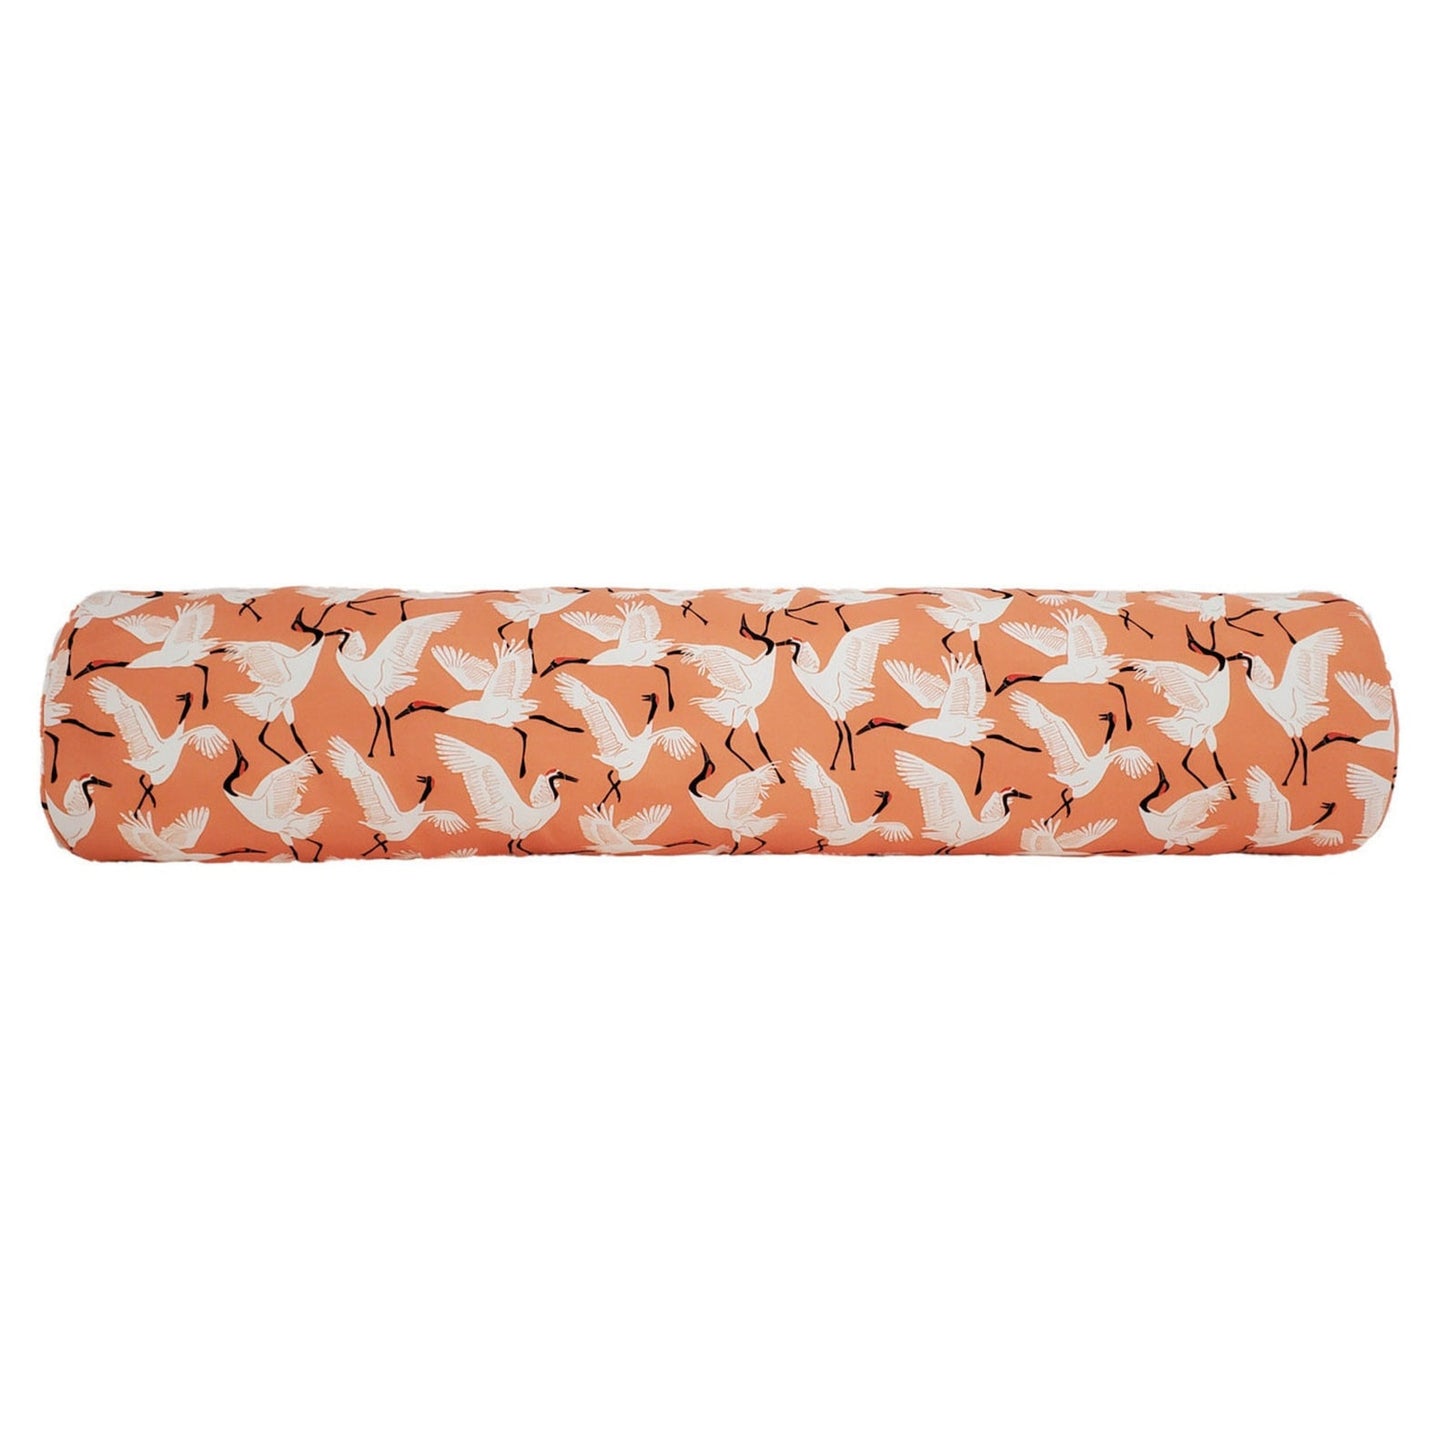 Novogratz Block Cranes Pillow Cover in Coral - OEKO TEX Sustainable / Available in Throw, Lumbar, Bolster Pillow Covers